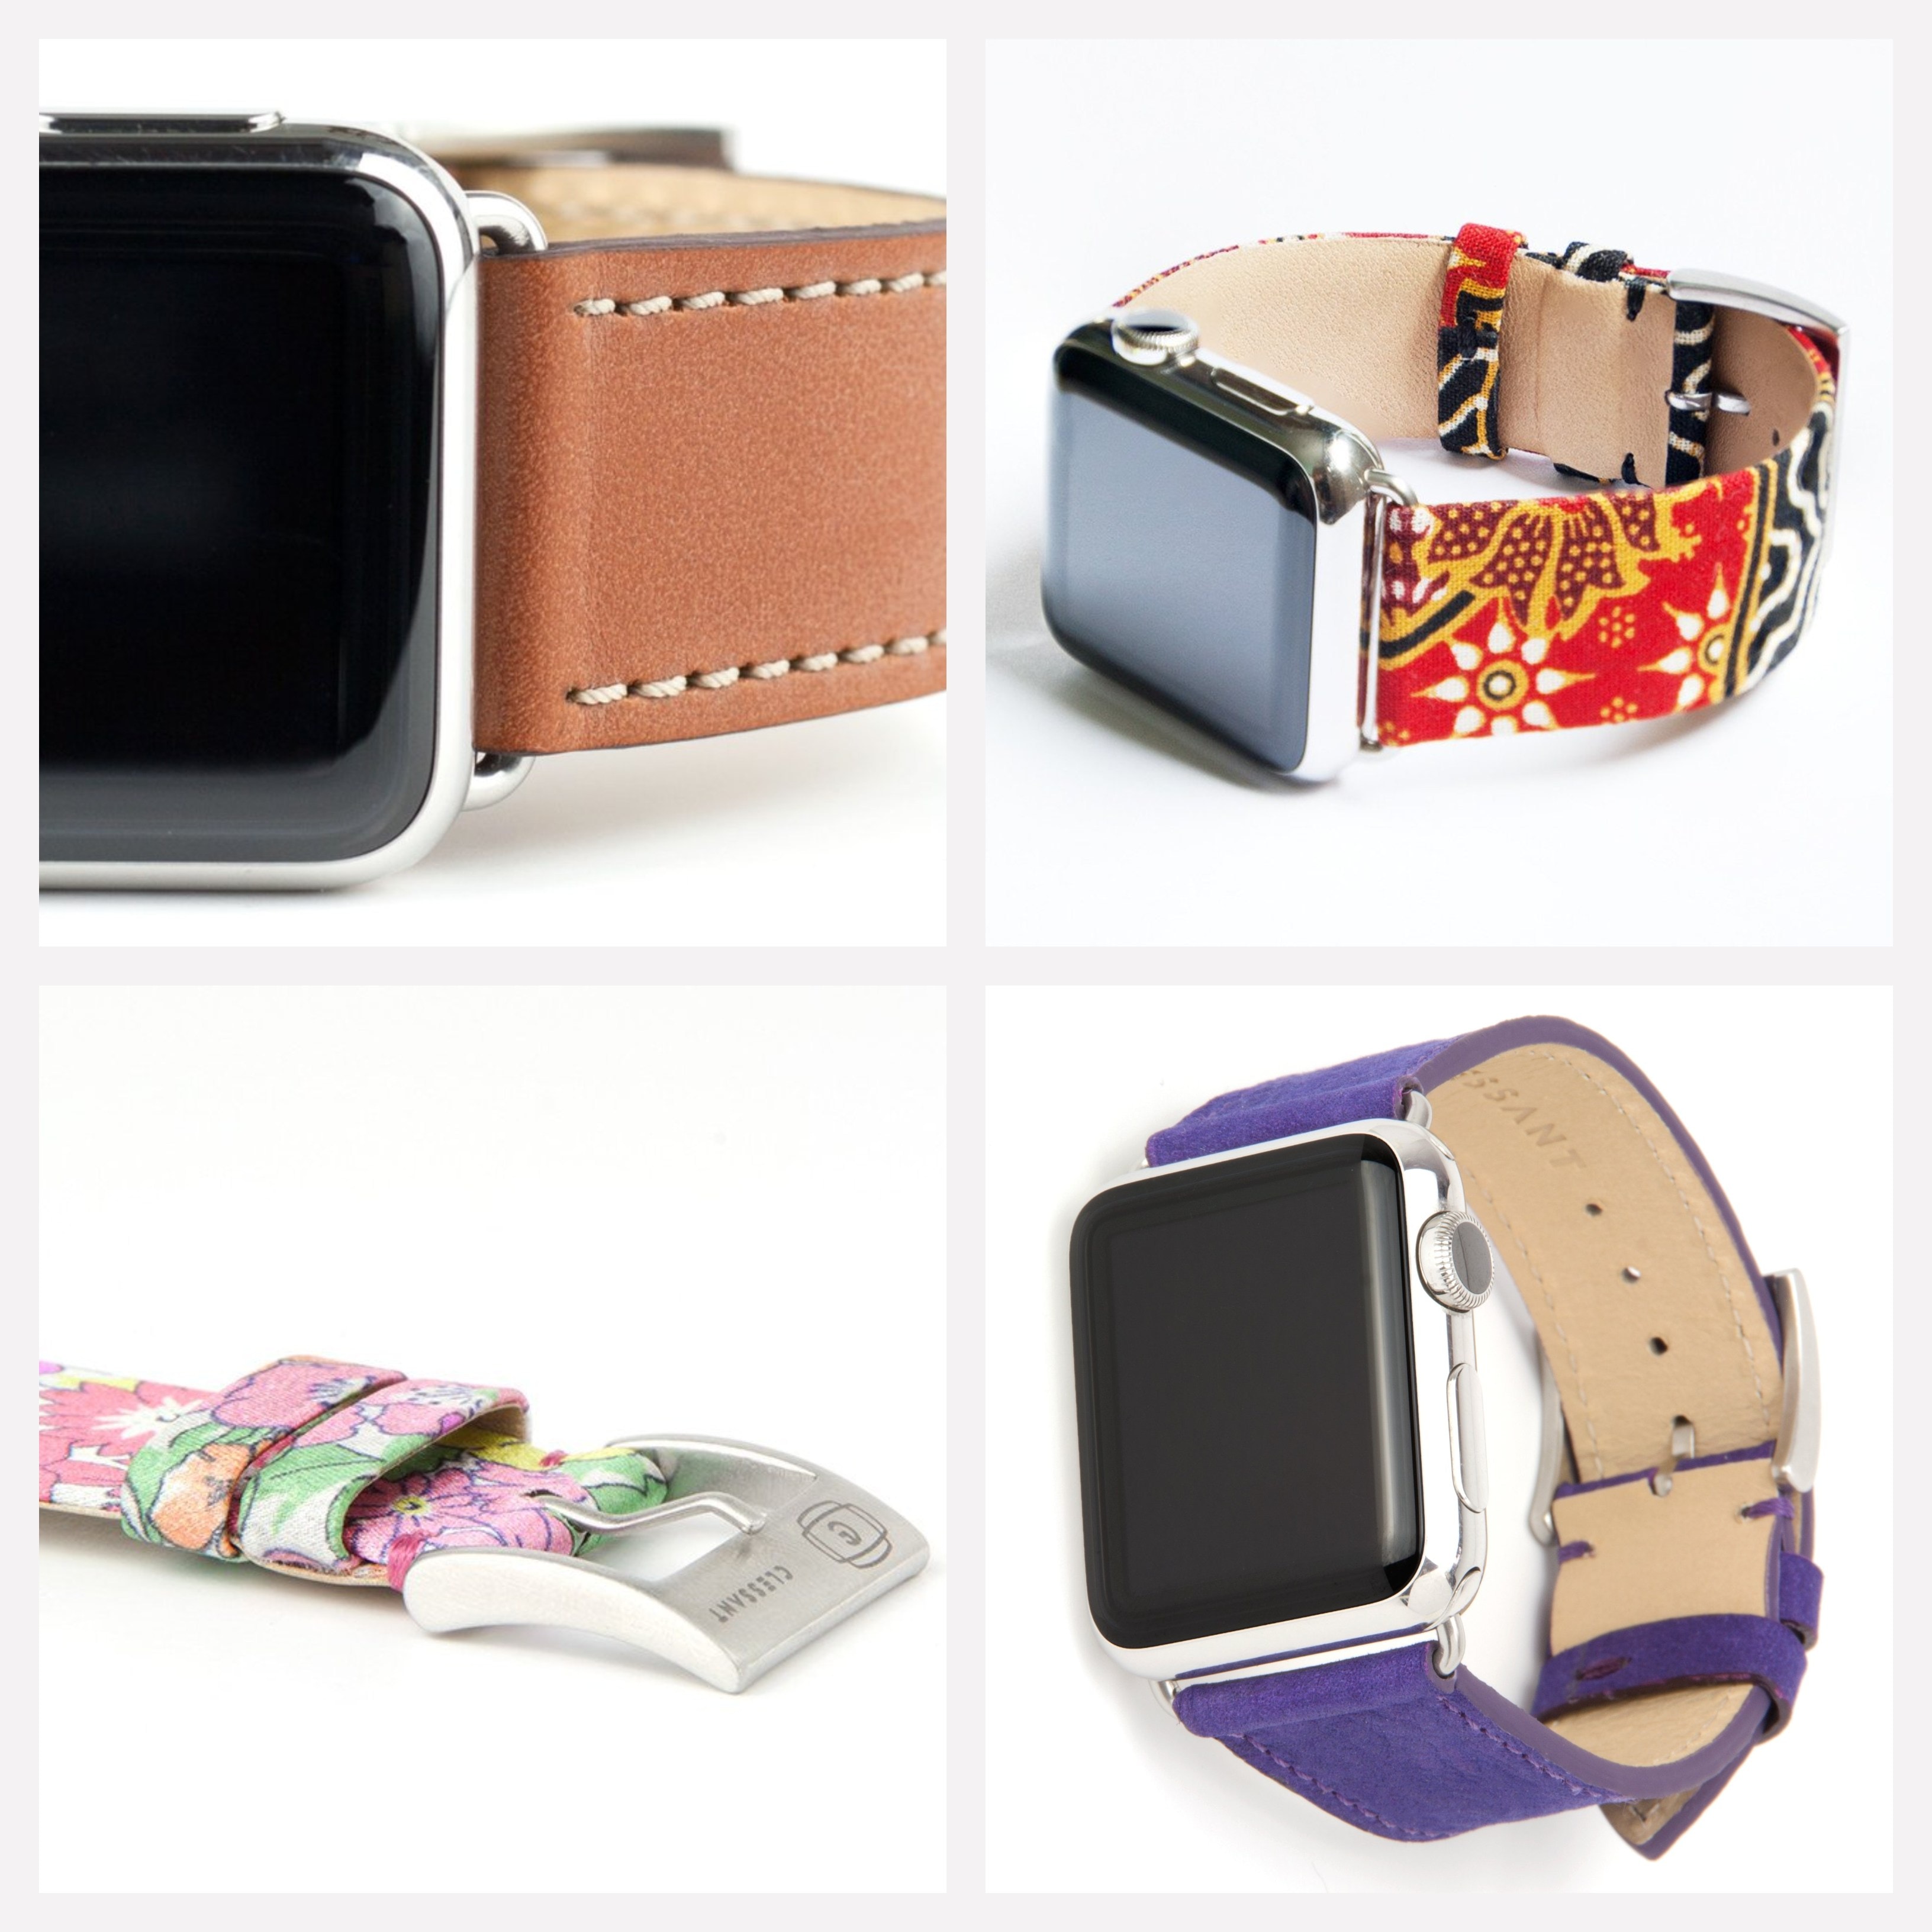 Buy one of these great Clessant Apple Watch bands, get a second at half off!